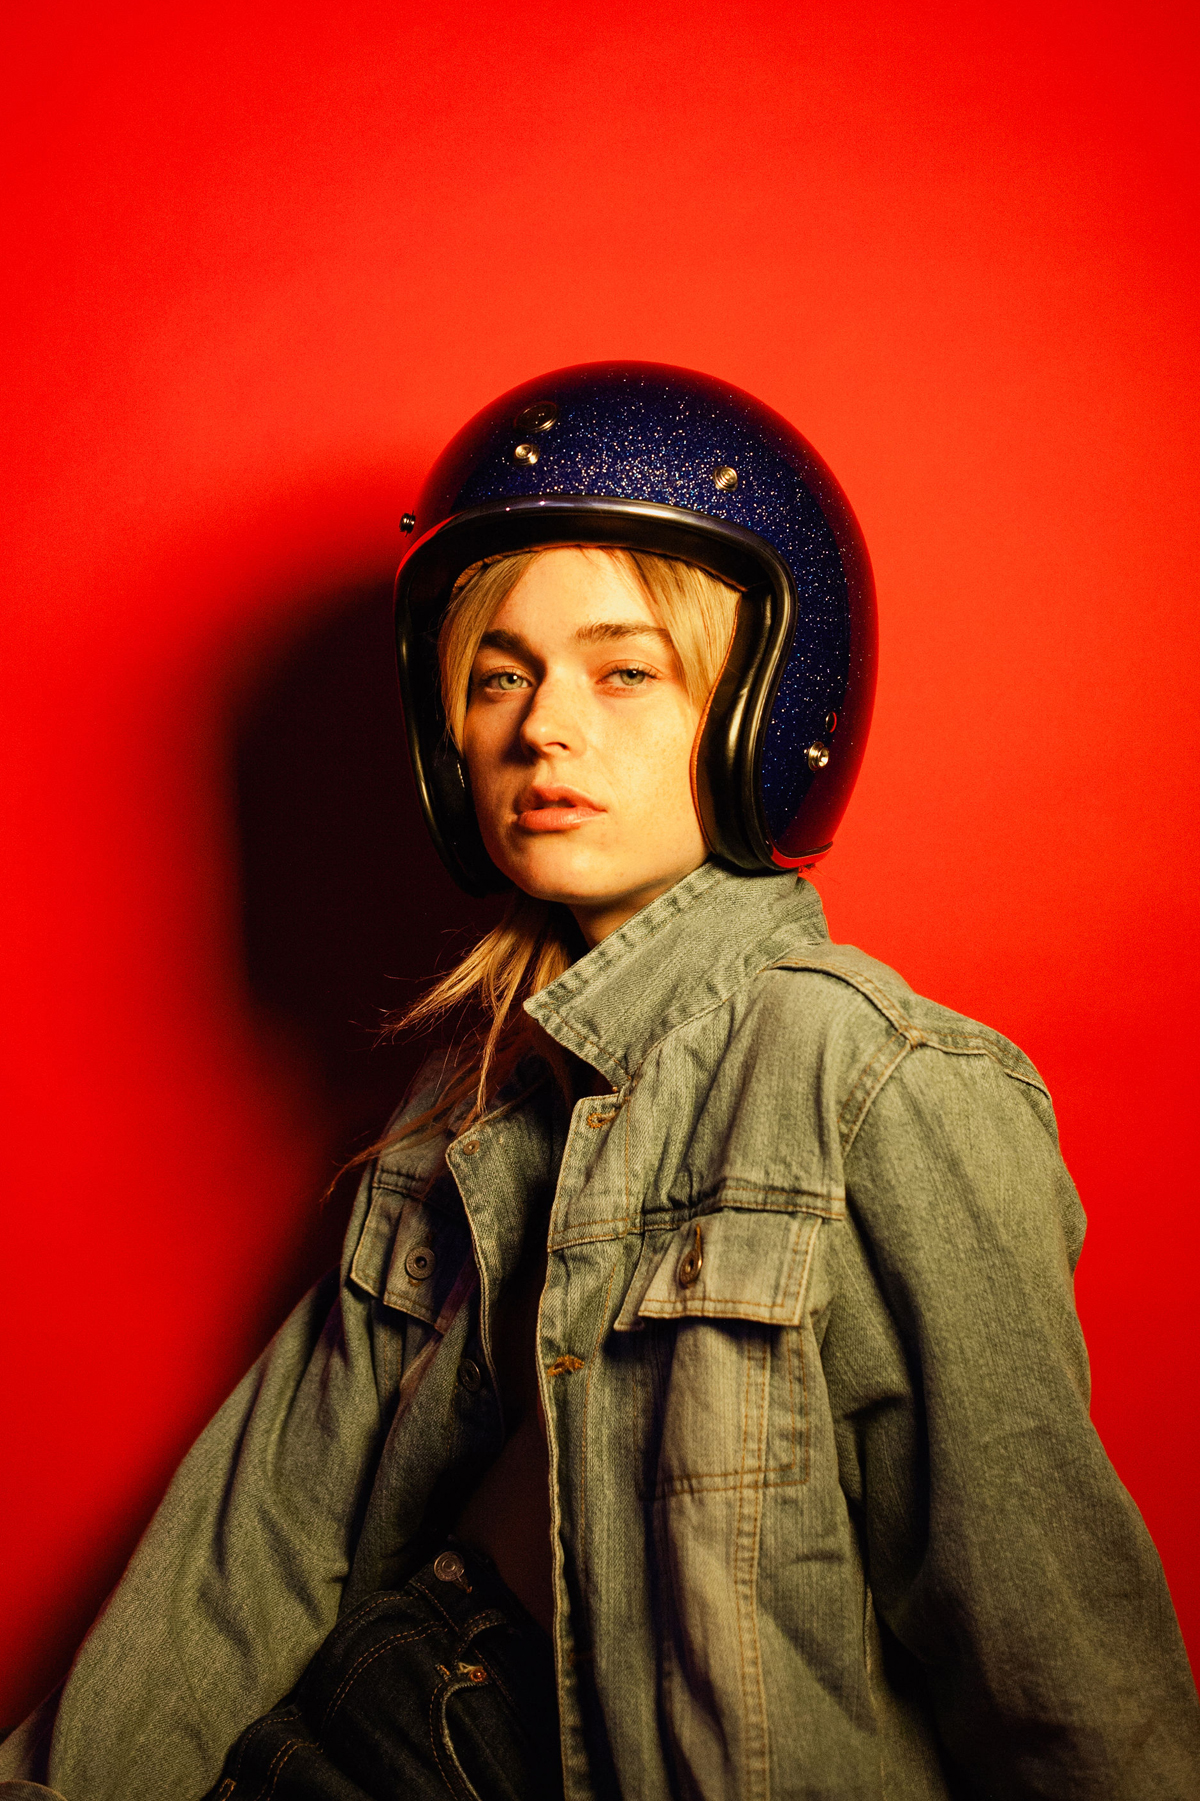 woman with helmet on red background